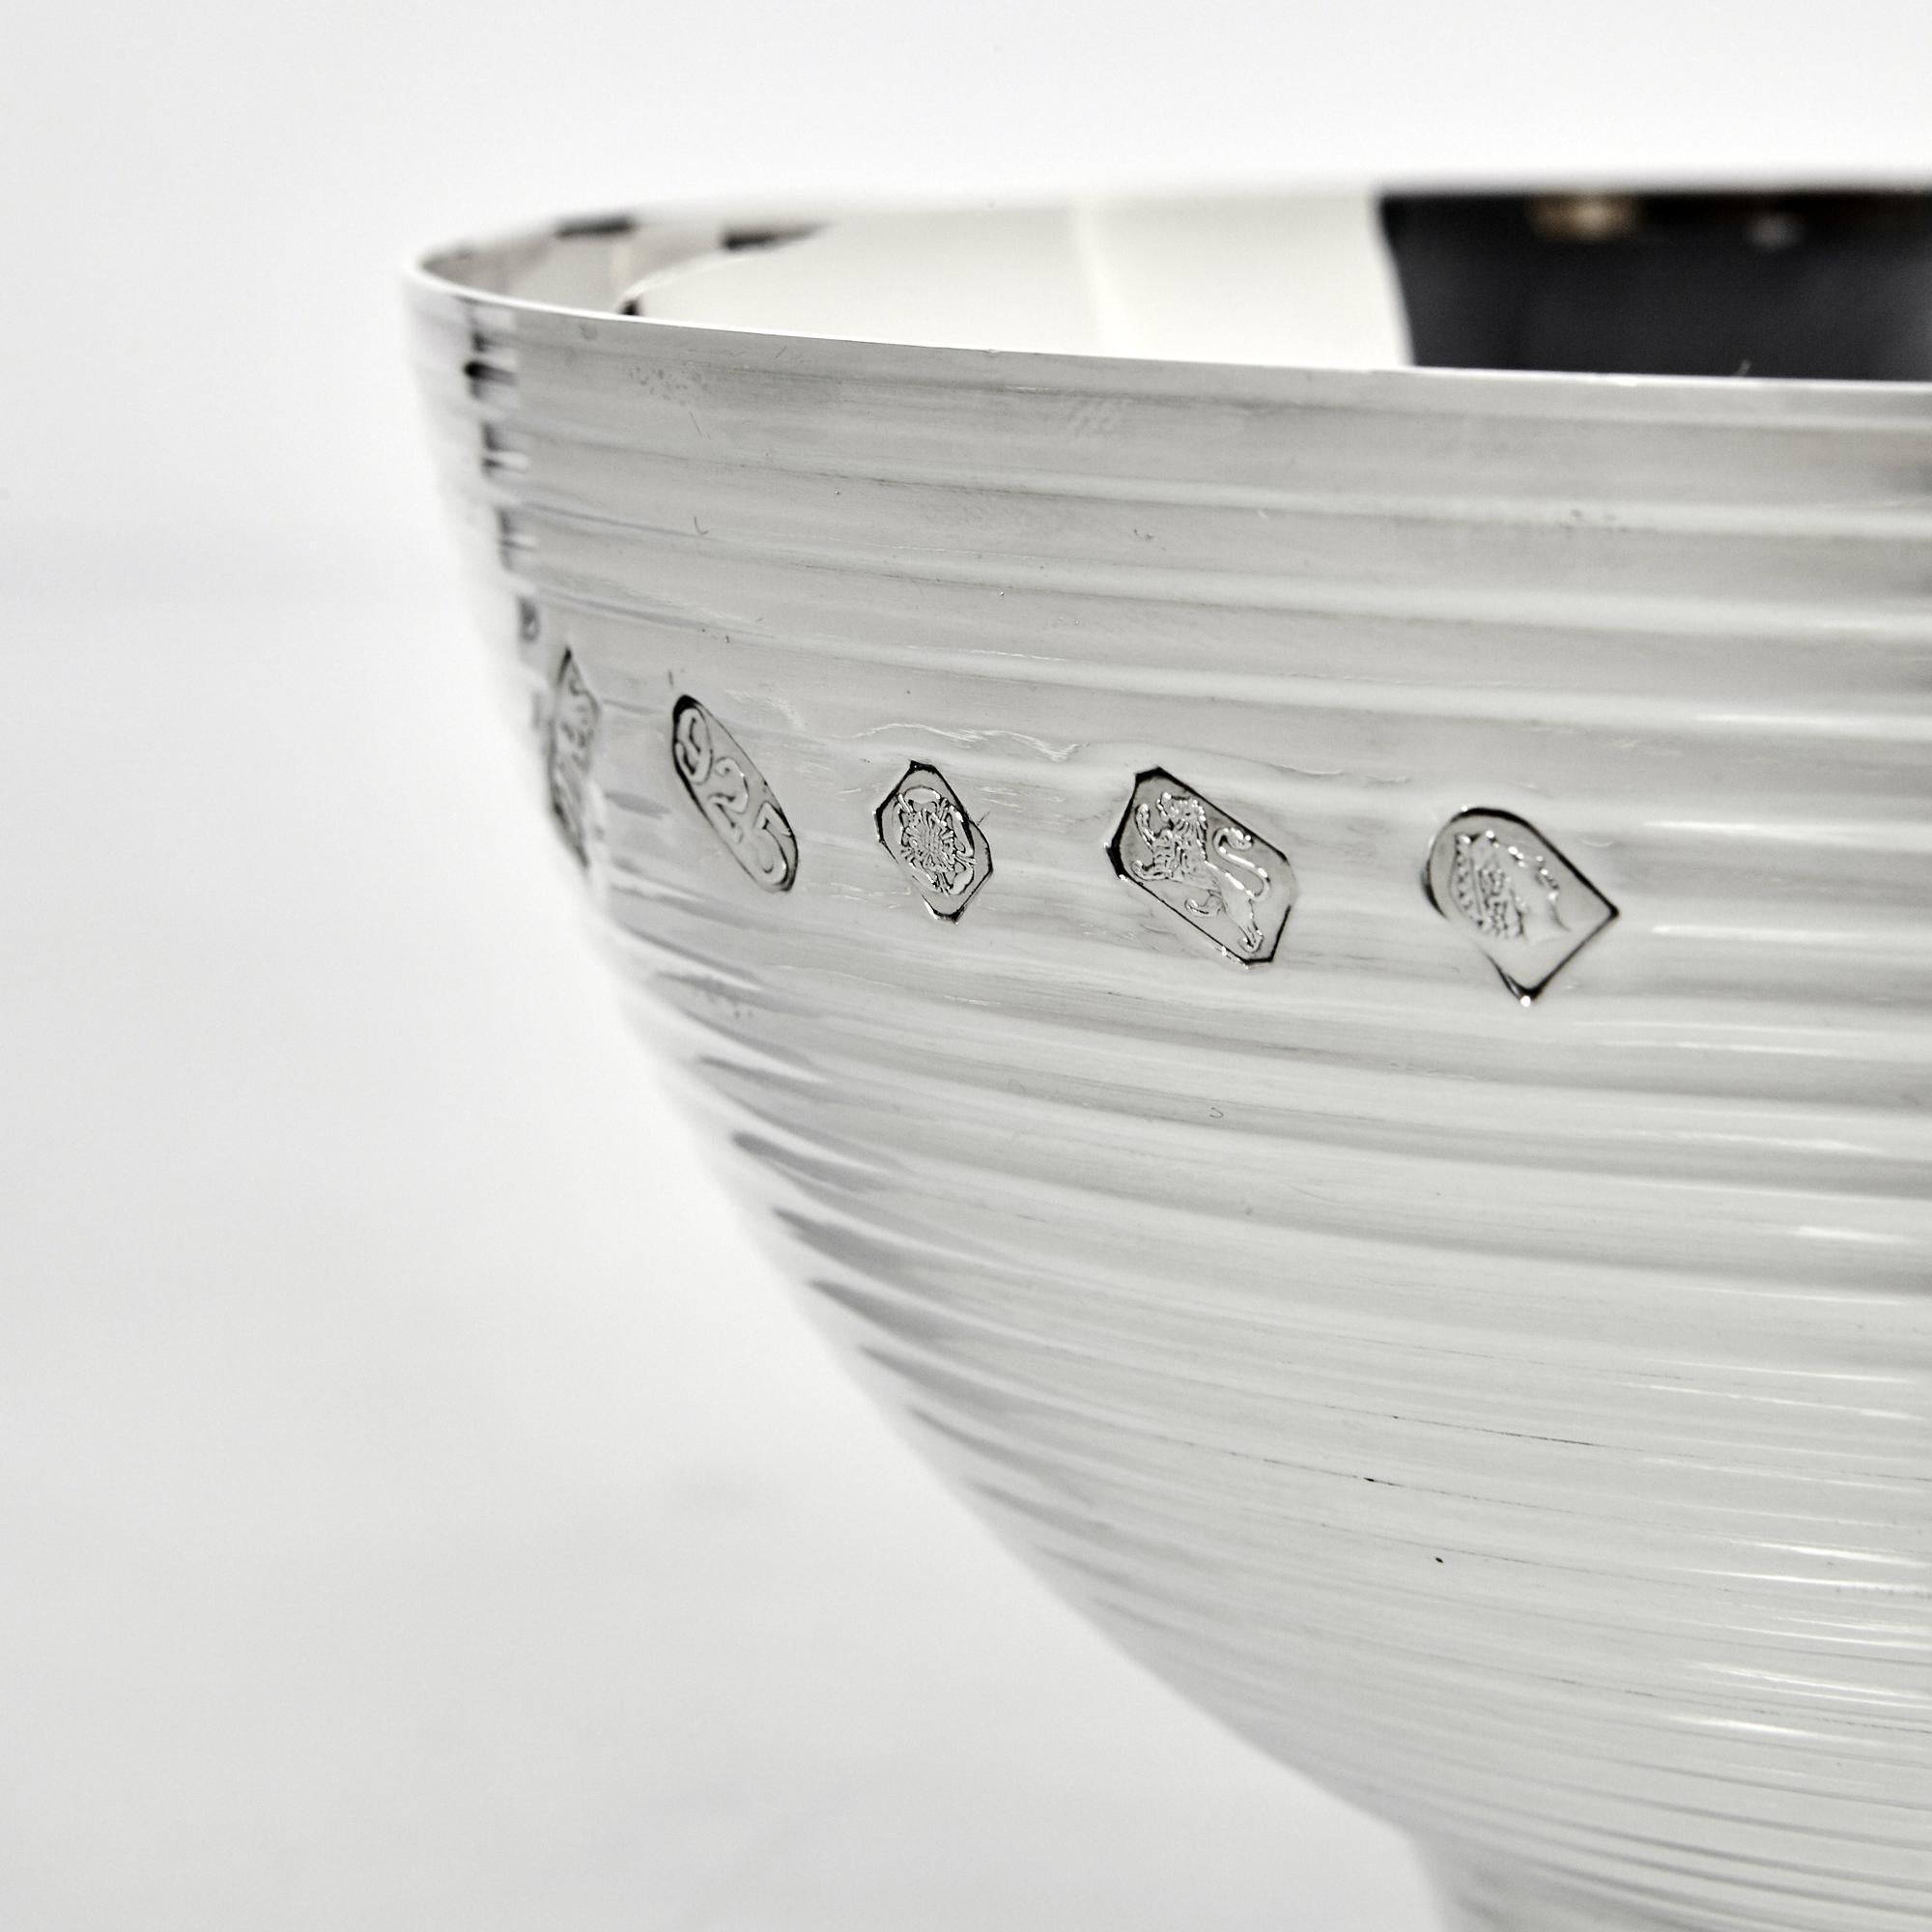 English Contemporary Style Ribbed Silver Bowl